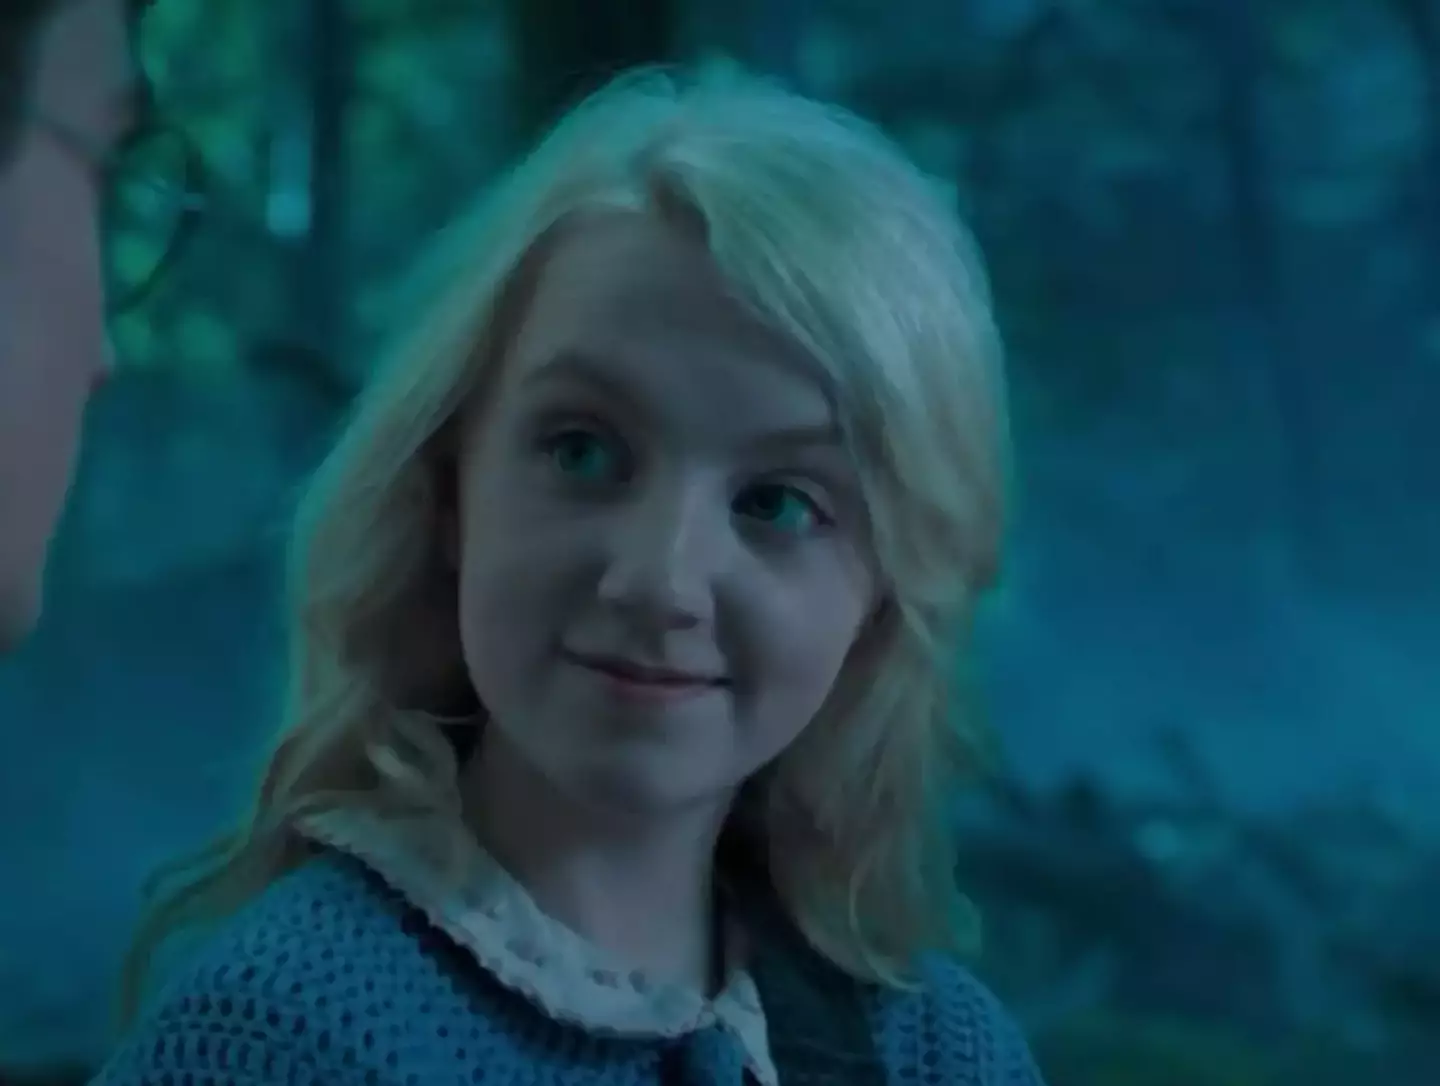 Evanna Lynch joined Harry Potter in 2007.